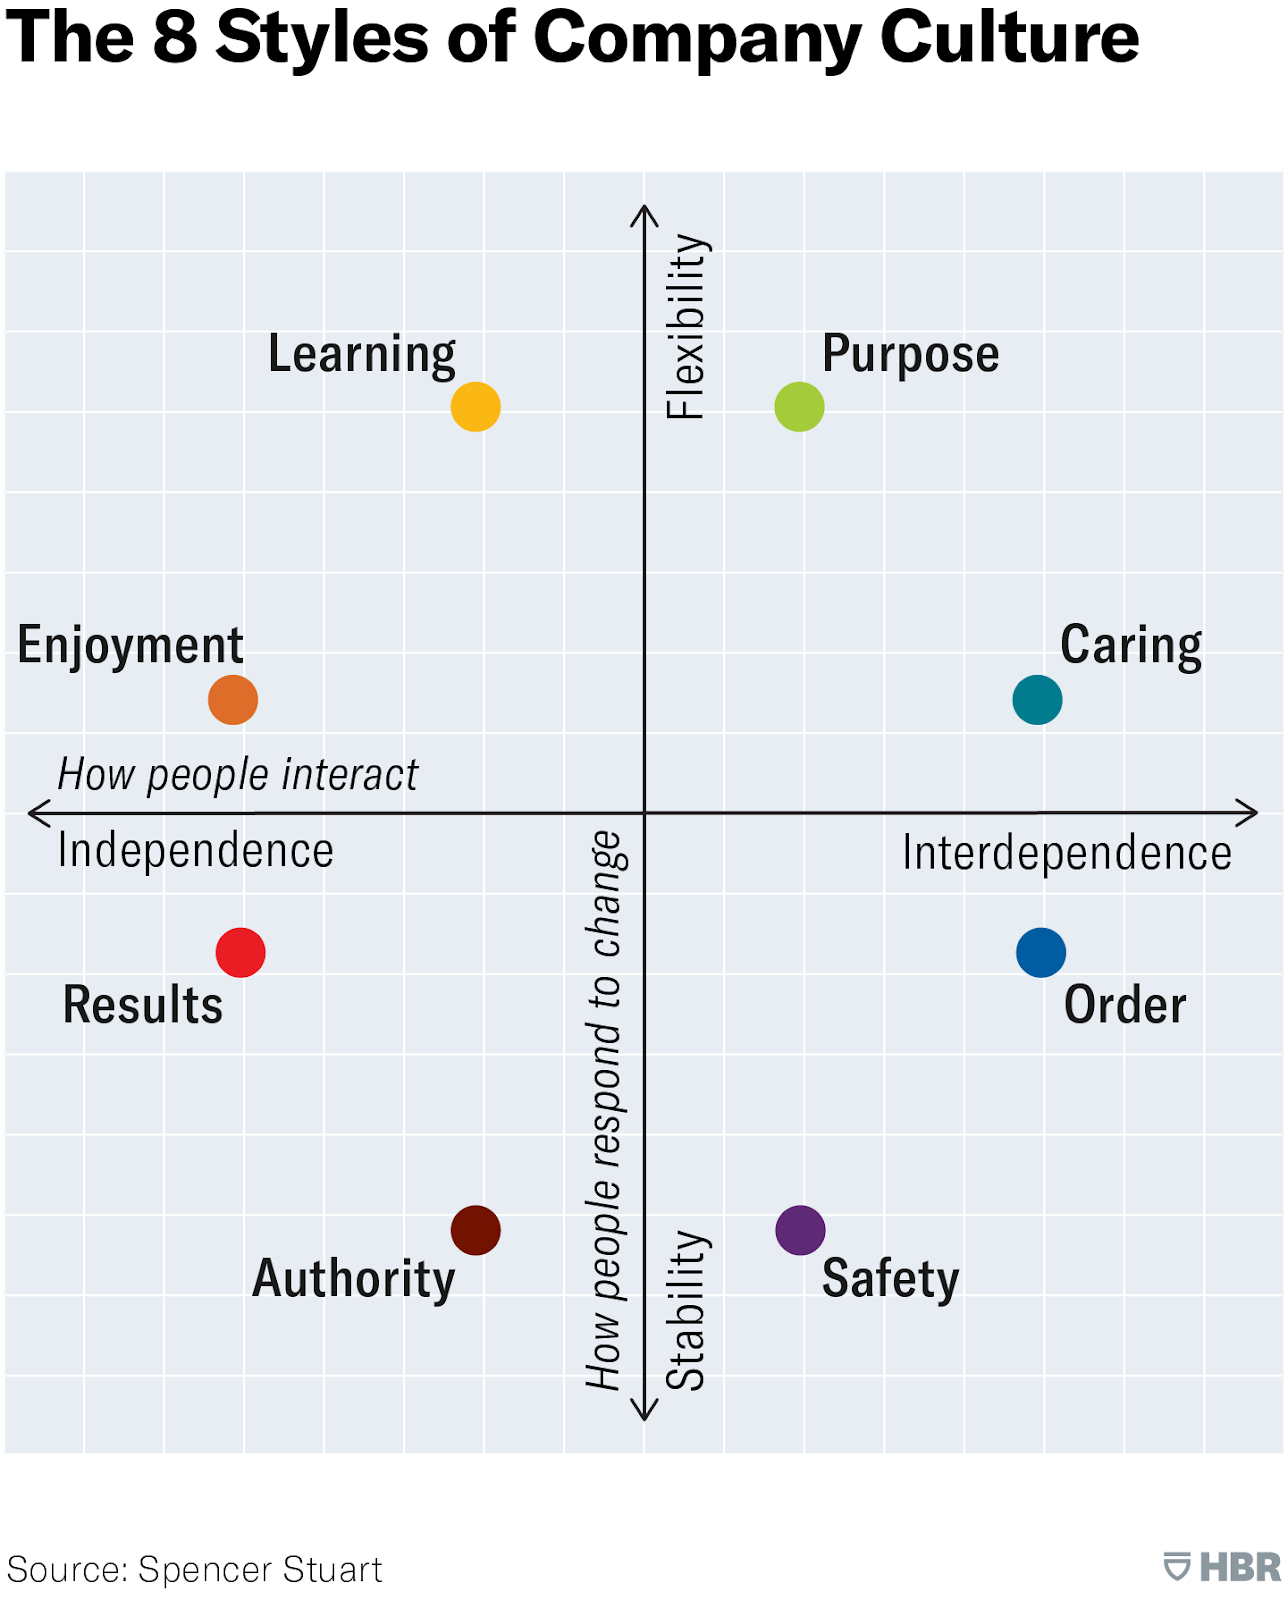 Clockwise order, starting top right: Purpose, caring, order, safety, authority, results, enjoyment, learning. These points are plotted across an x axis of 'how people interact' which ranges from independence to interdependence, and a y axis of 'how people respond to change' which ranges from stability to flexibility.